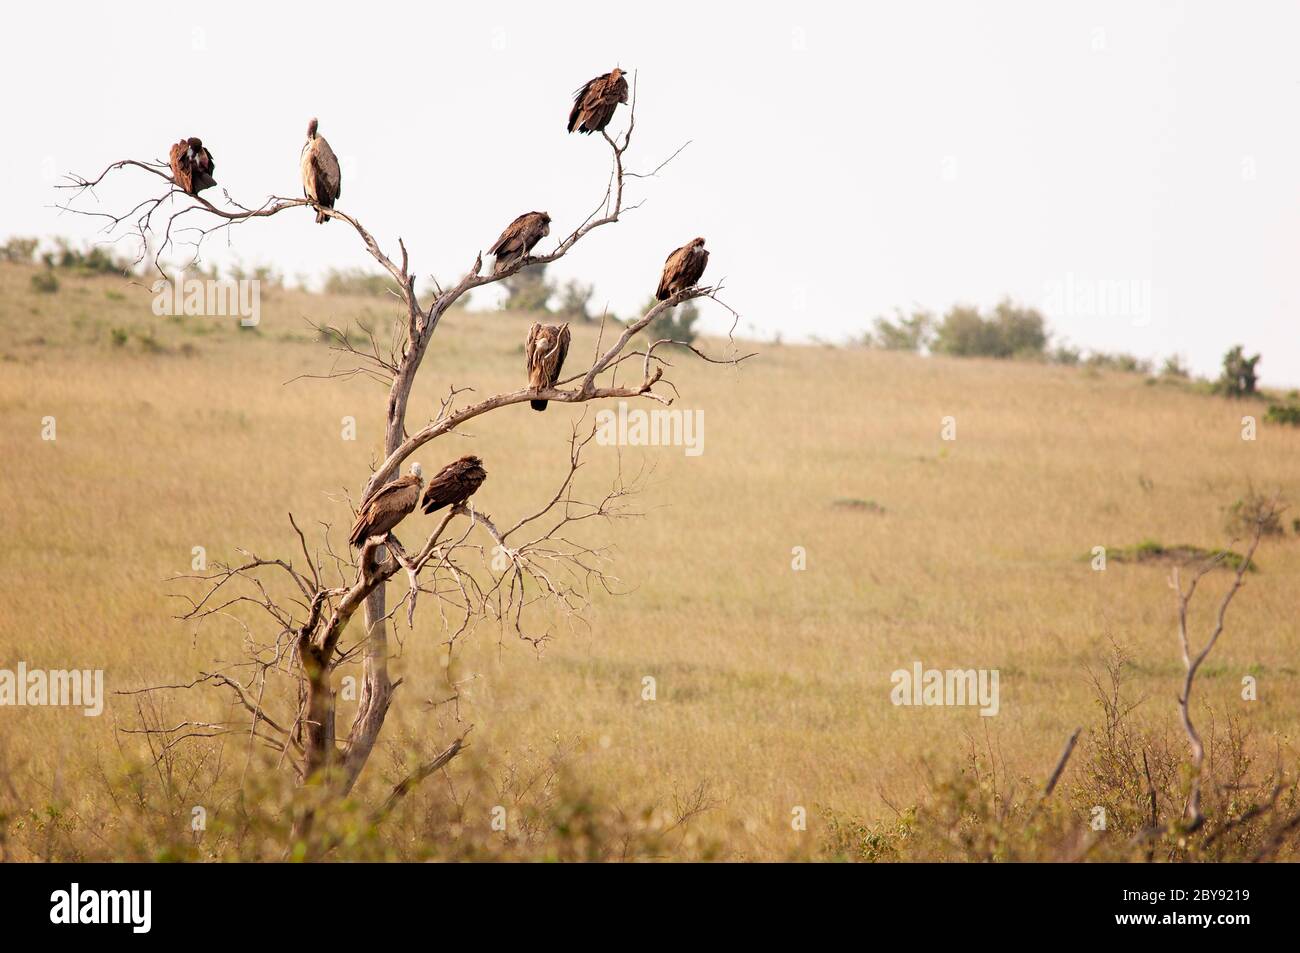 African white-backed vultures, Gyps africanus, perched on a tree in Masai Mara National Reserve. Kenya. Africa. Stock Photo